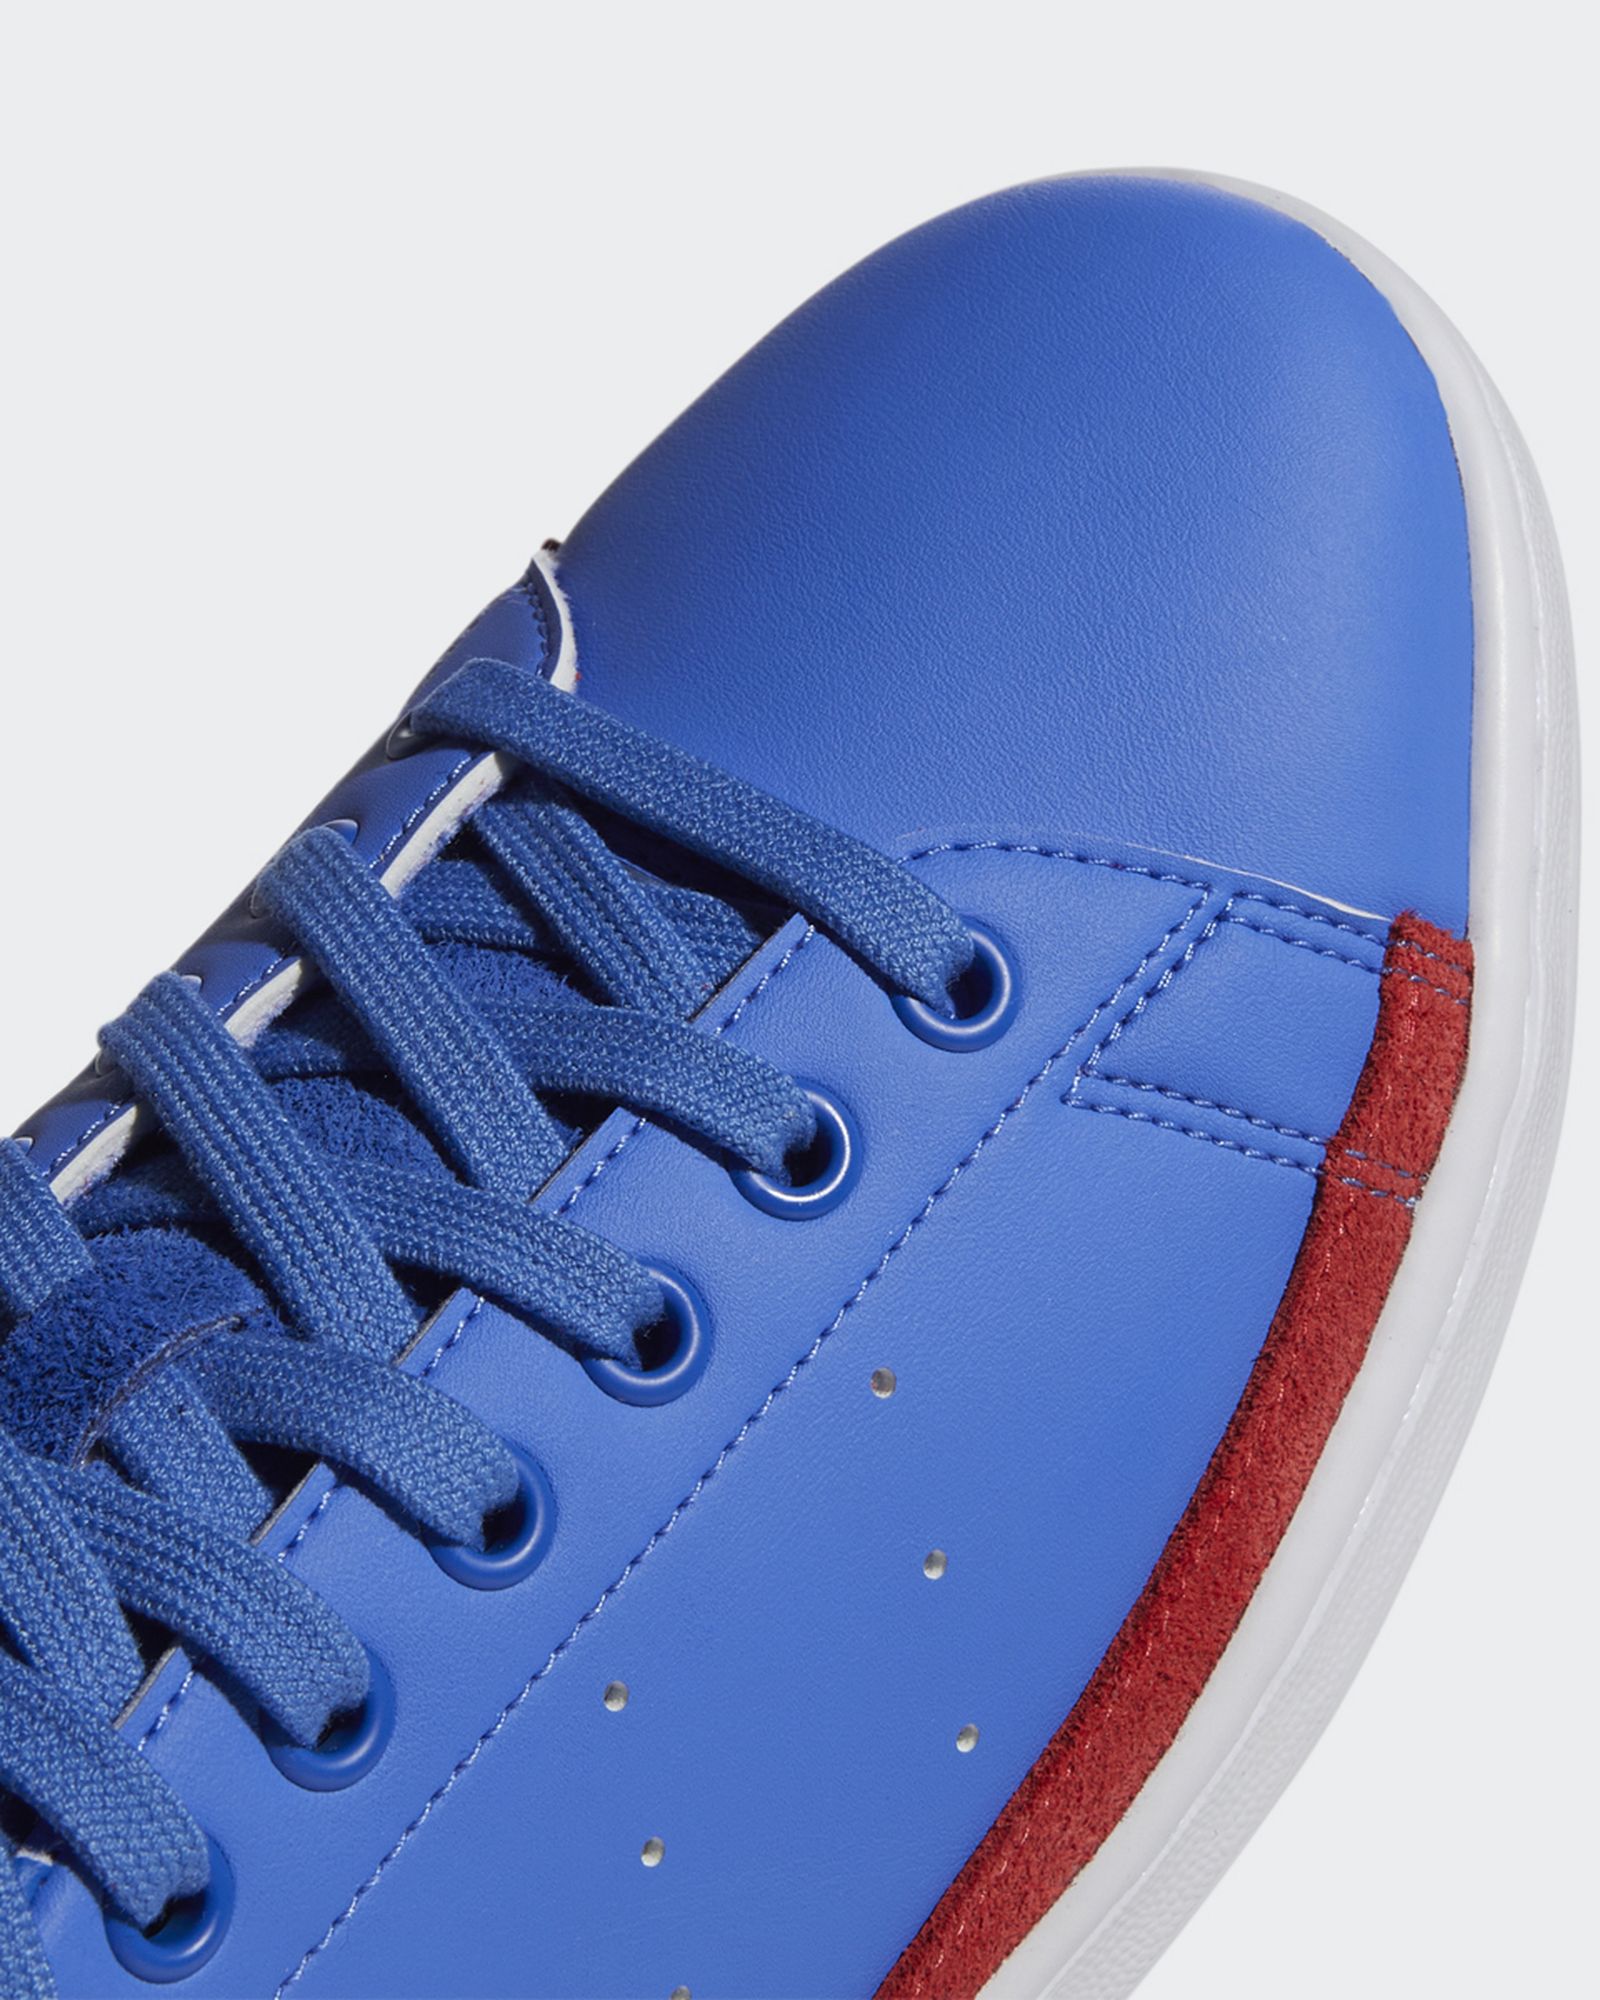 south-park-adidas-shoes-release-date-collection (34)